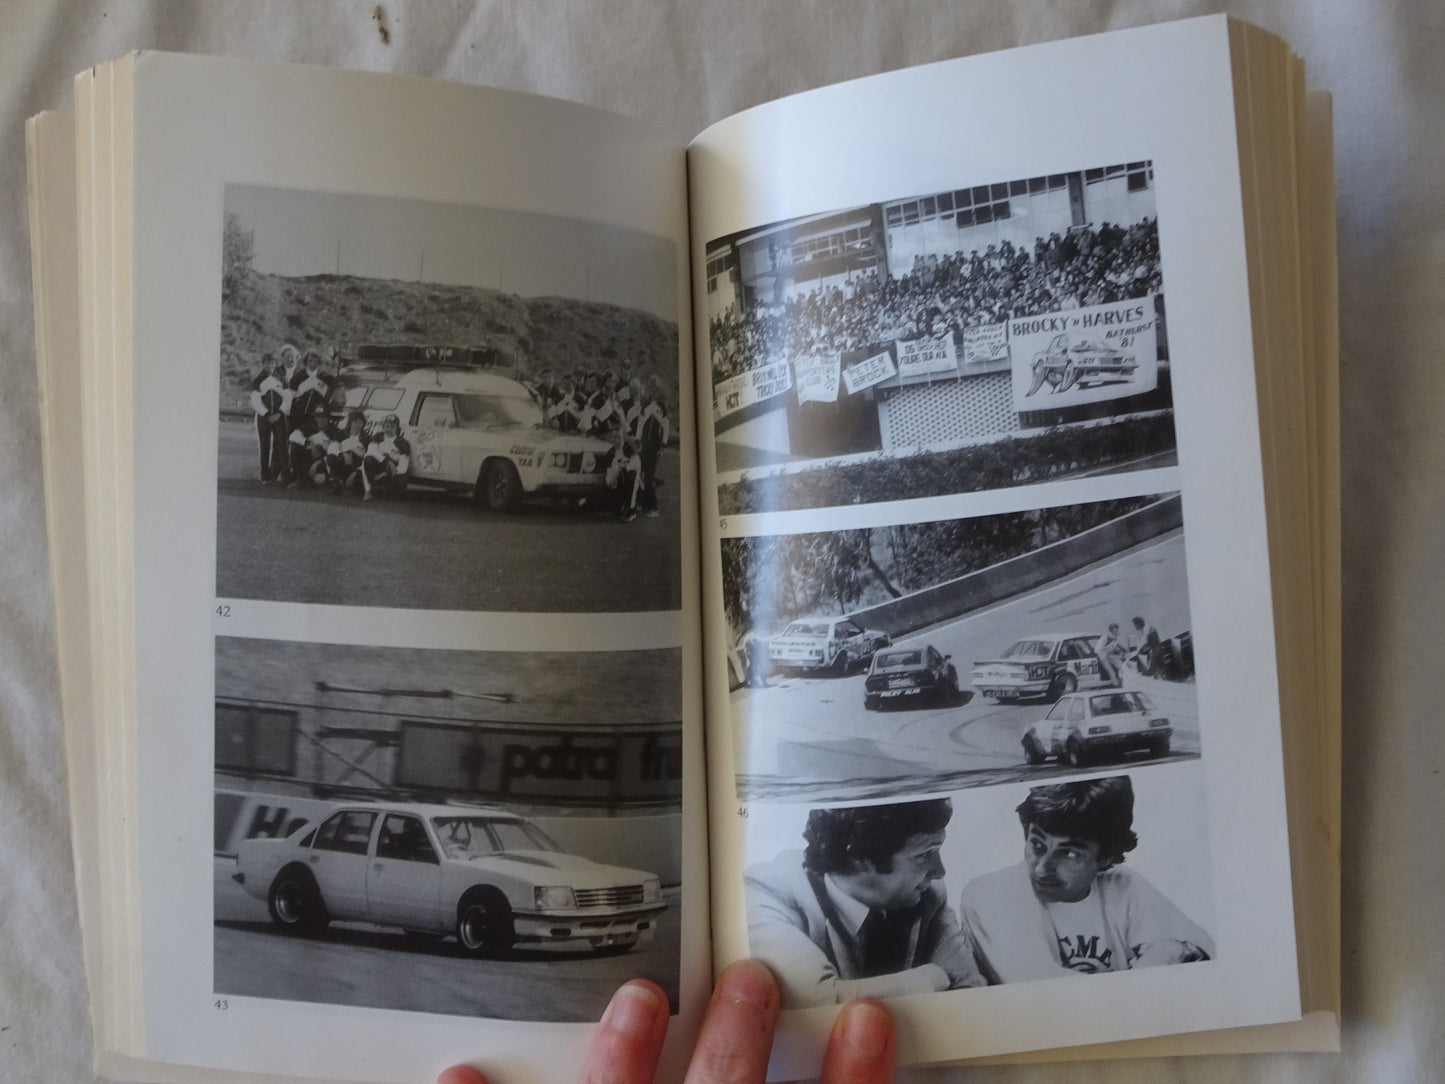 The Rise & Fall of Peter Brock by Bill Tuckey